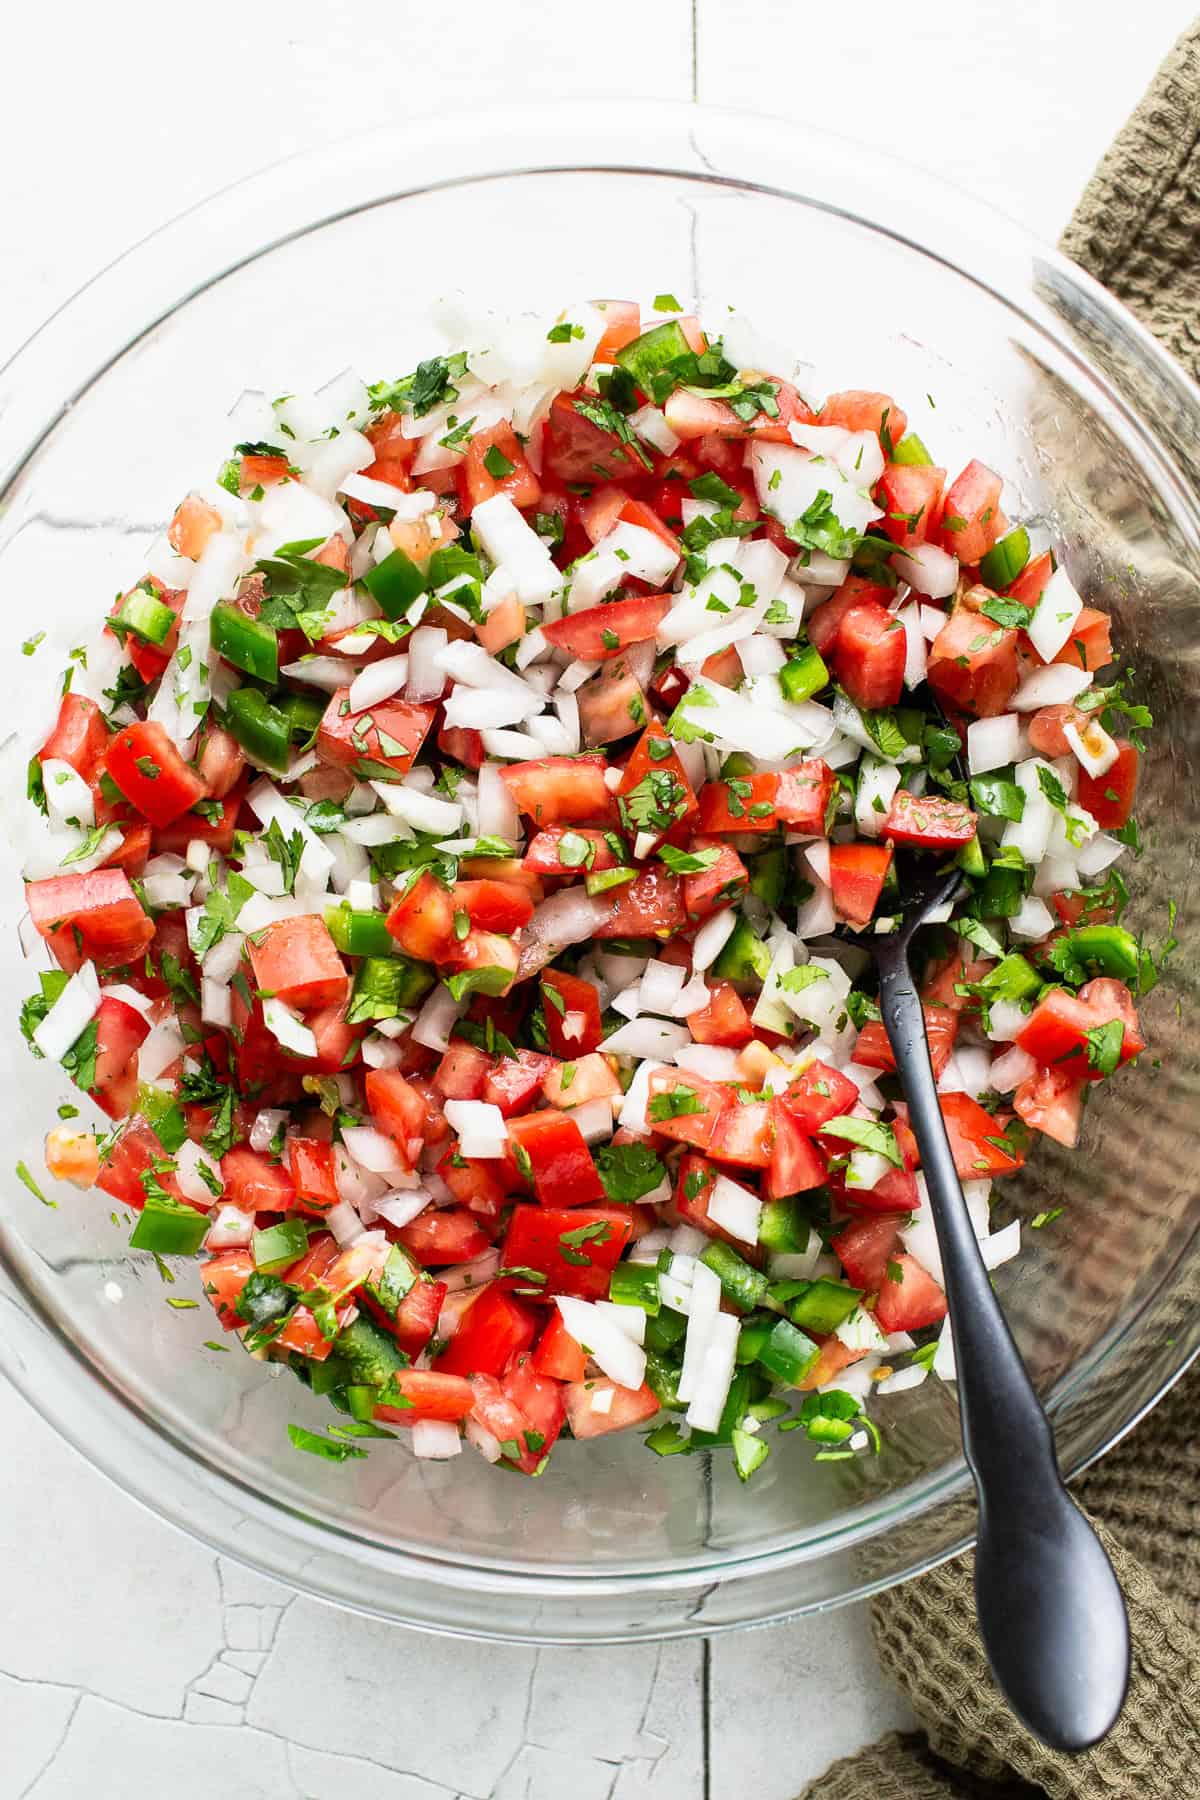 Pico de gallo ingredients tossed together in a glass bowl.